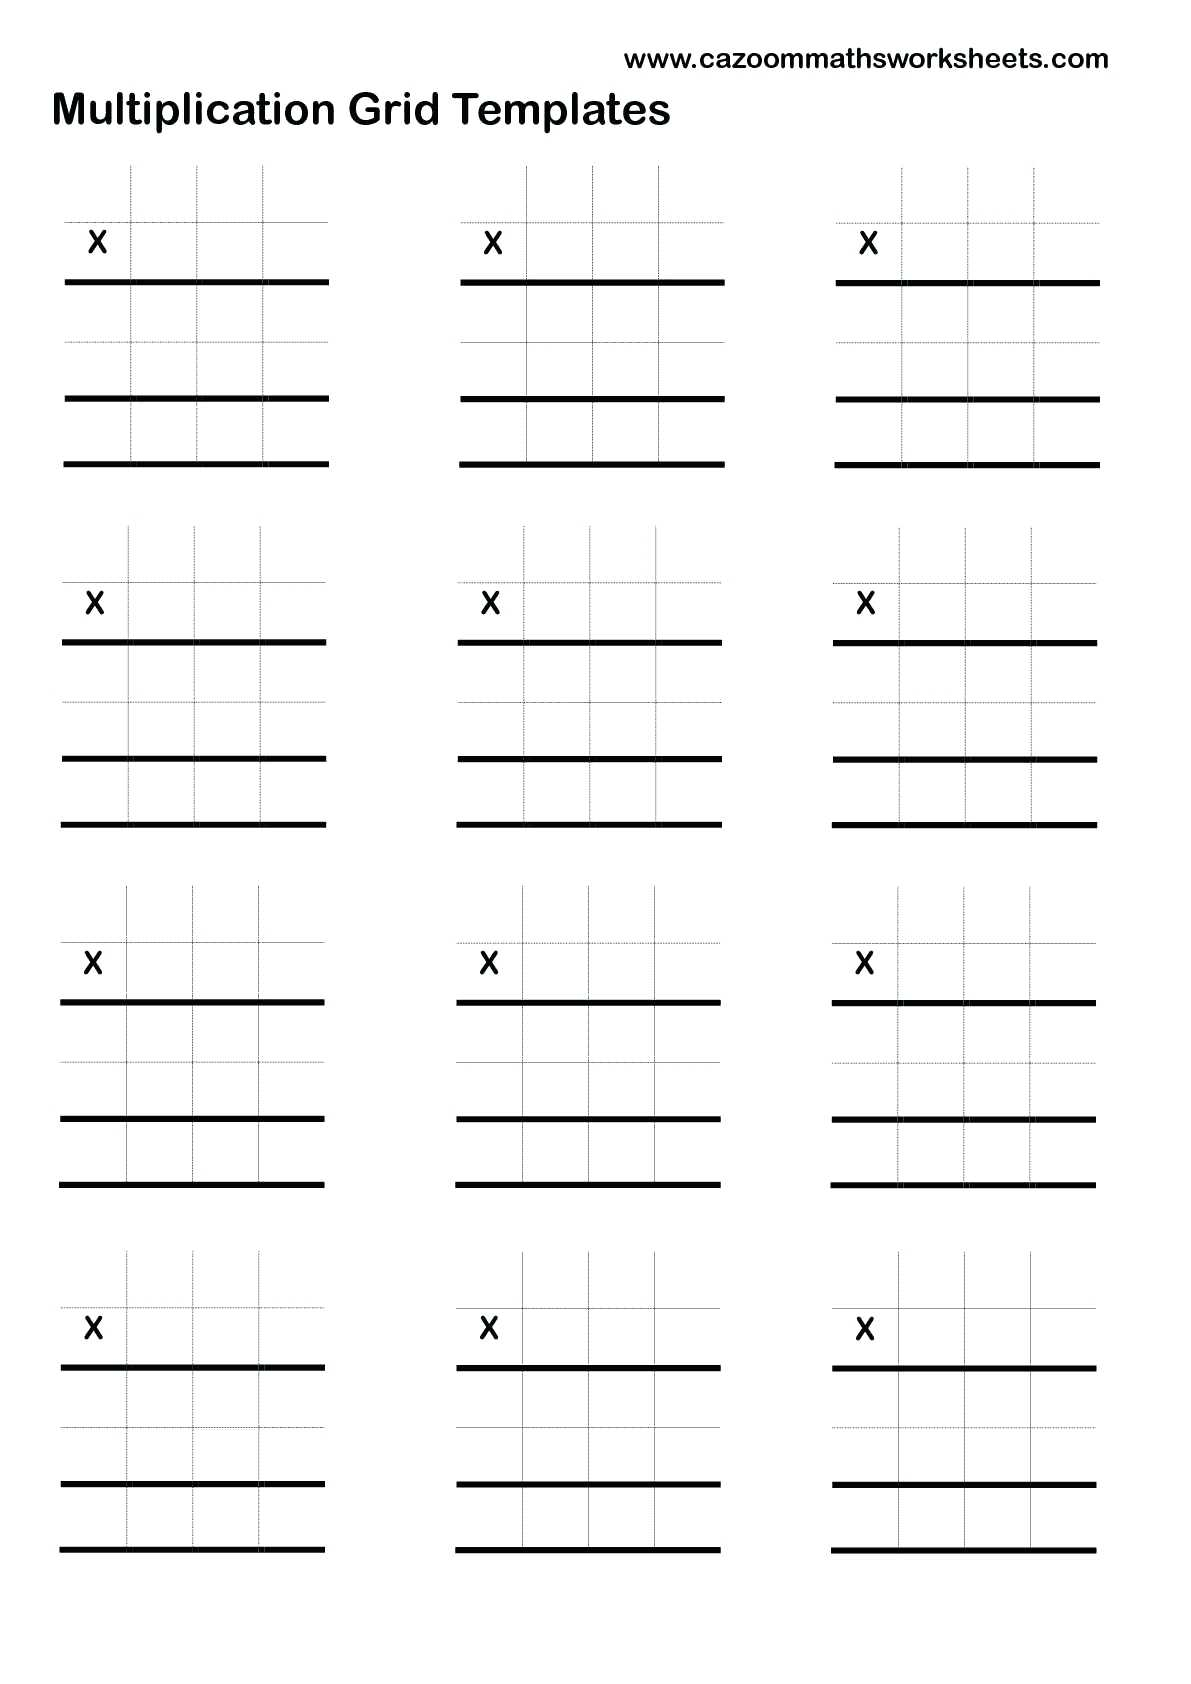 multiplication-introduction-to-the-grid-method-teaching-resources